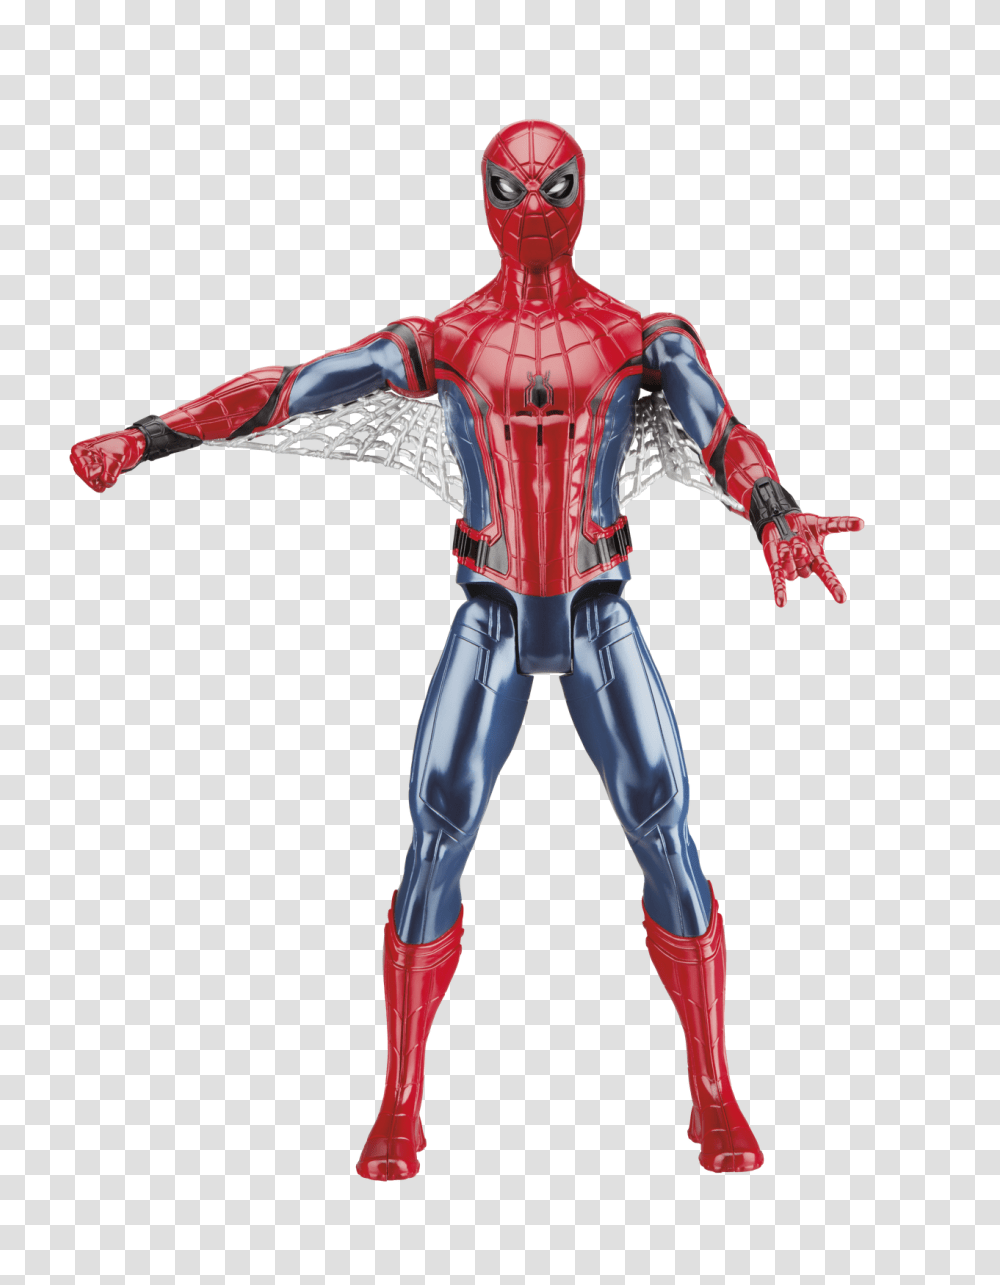 New Spider Man Homecoming Toys From Hasbro Revealed, Person, Human, Poster, Advertisement Transparent Png